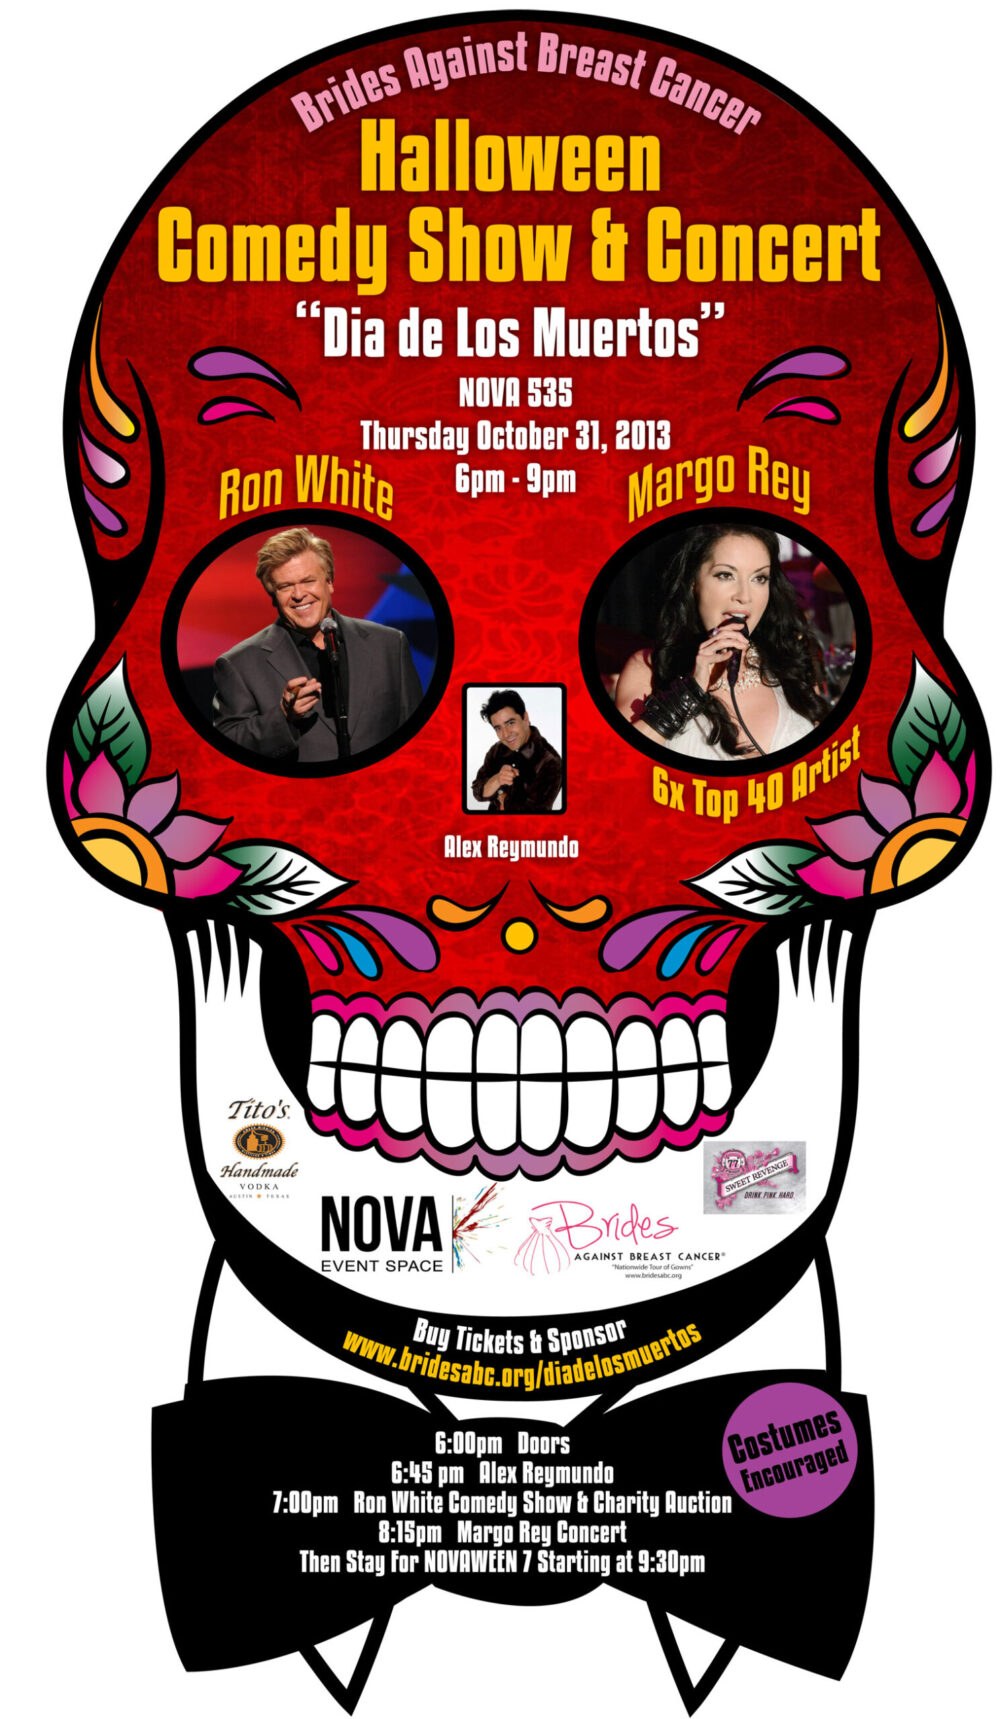 Support Brides Against Breast Cancer on Halloween Night RON WHITE Comedy Show and Live Auction at NOVA 535 in St. Pete